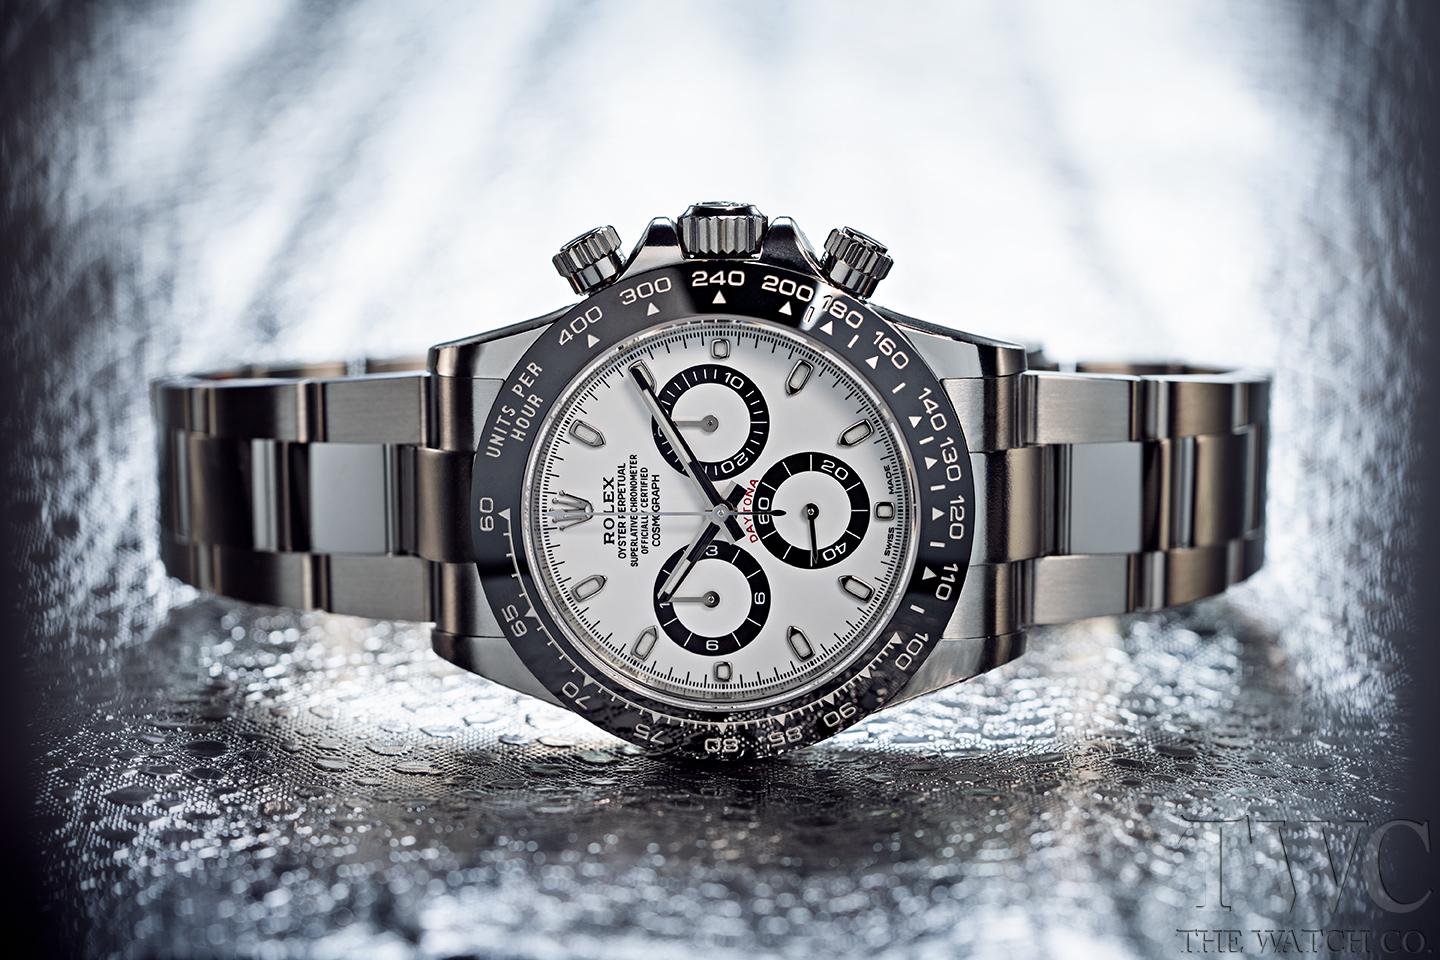 8 Luxury Sport Watches for Men - The Watch Company